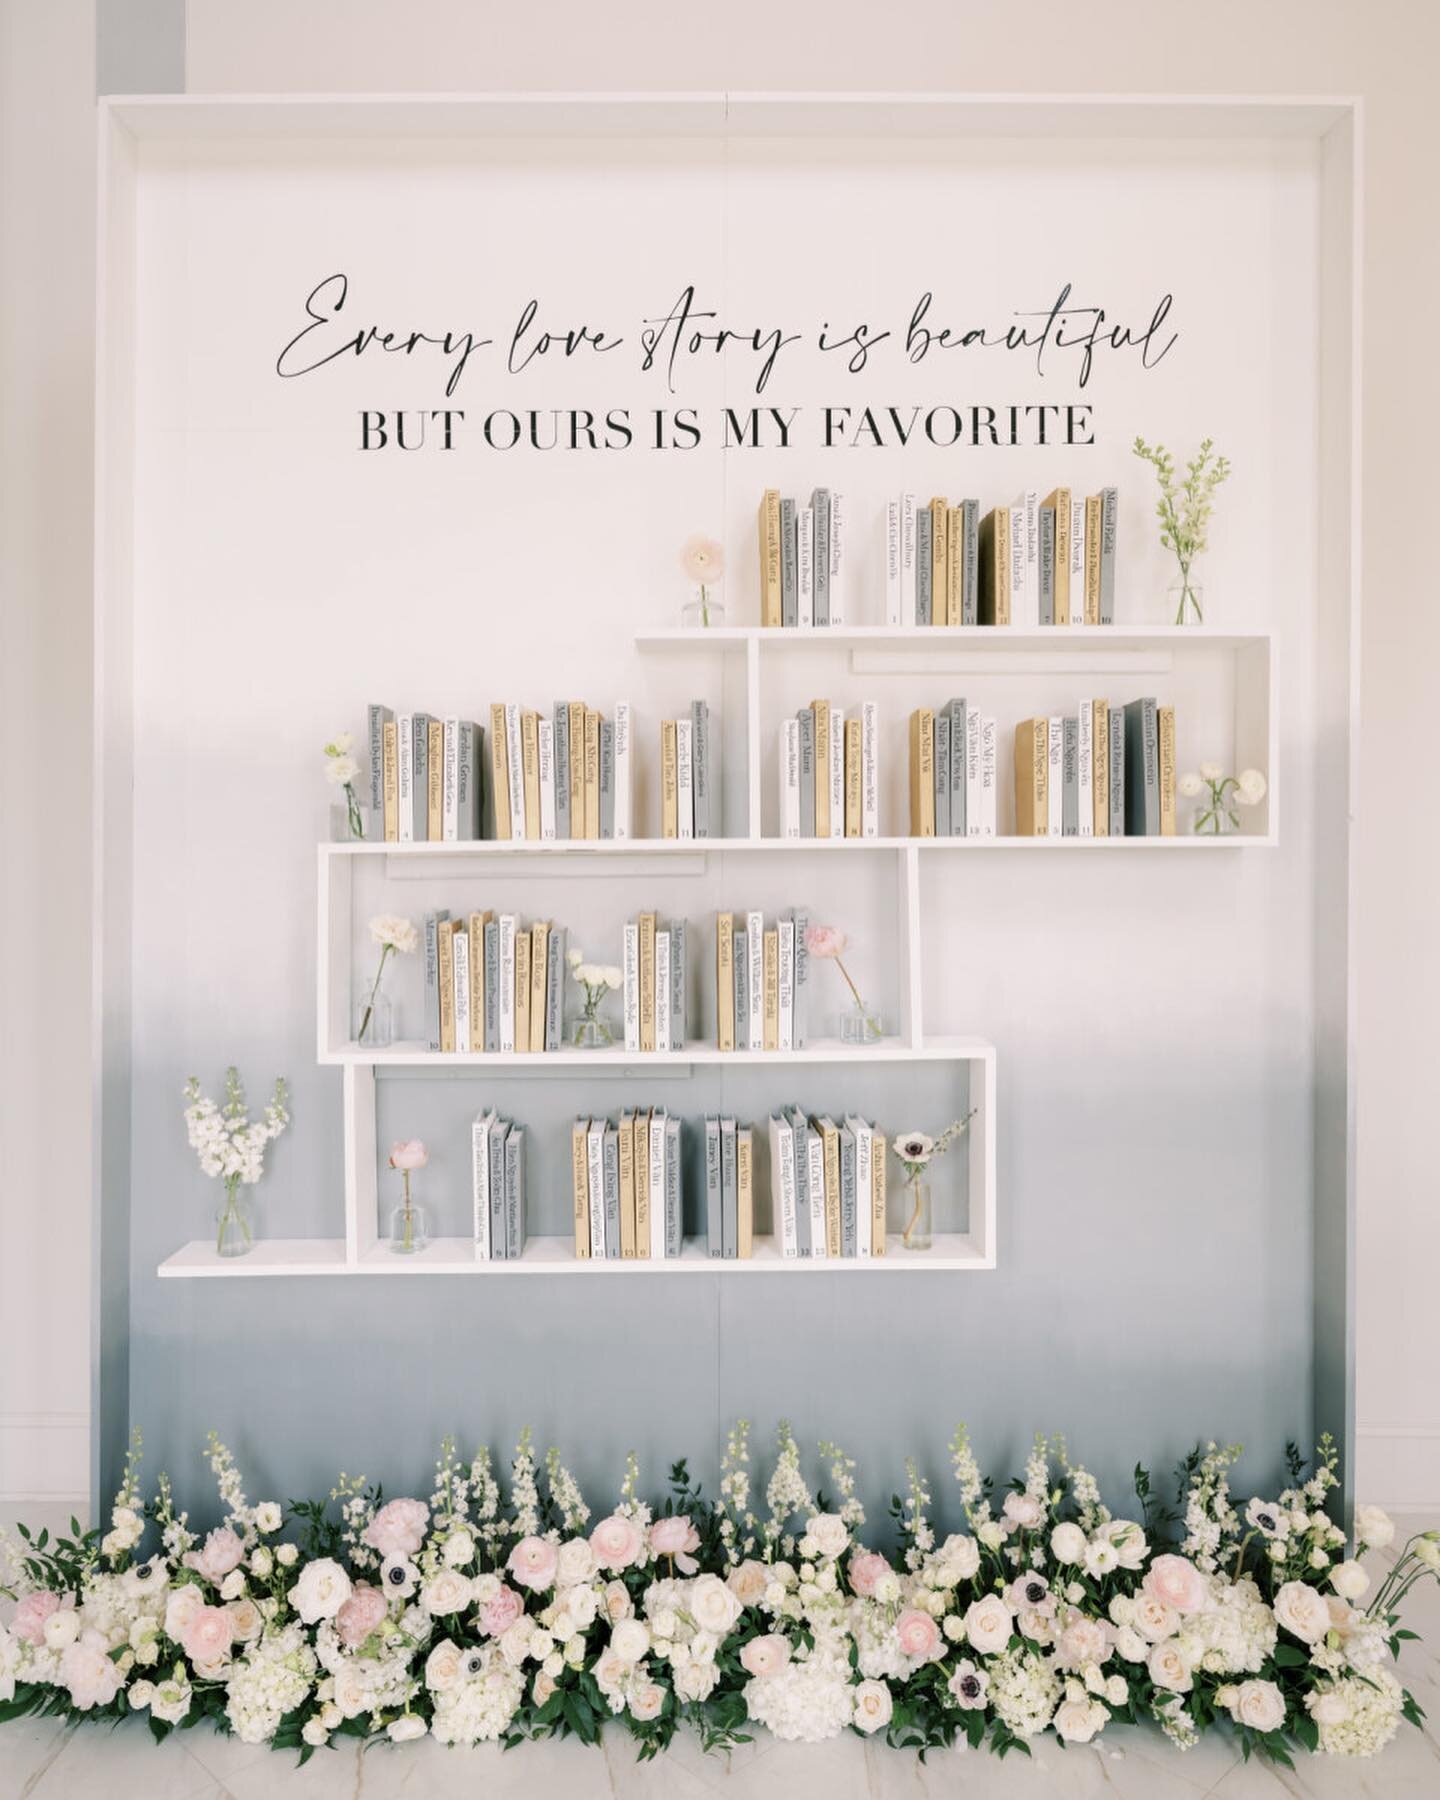 Every love story is beautiful but ours is my favorite📖

So thrilled to share these photos with you all. 
For this seating chart each guests name was handwritten on the spine of the book with their table number. 
The couple had a love for books and w